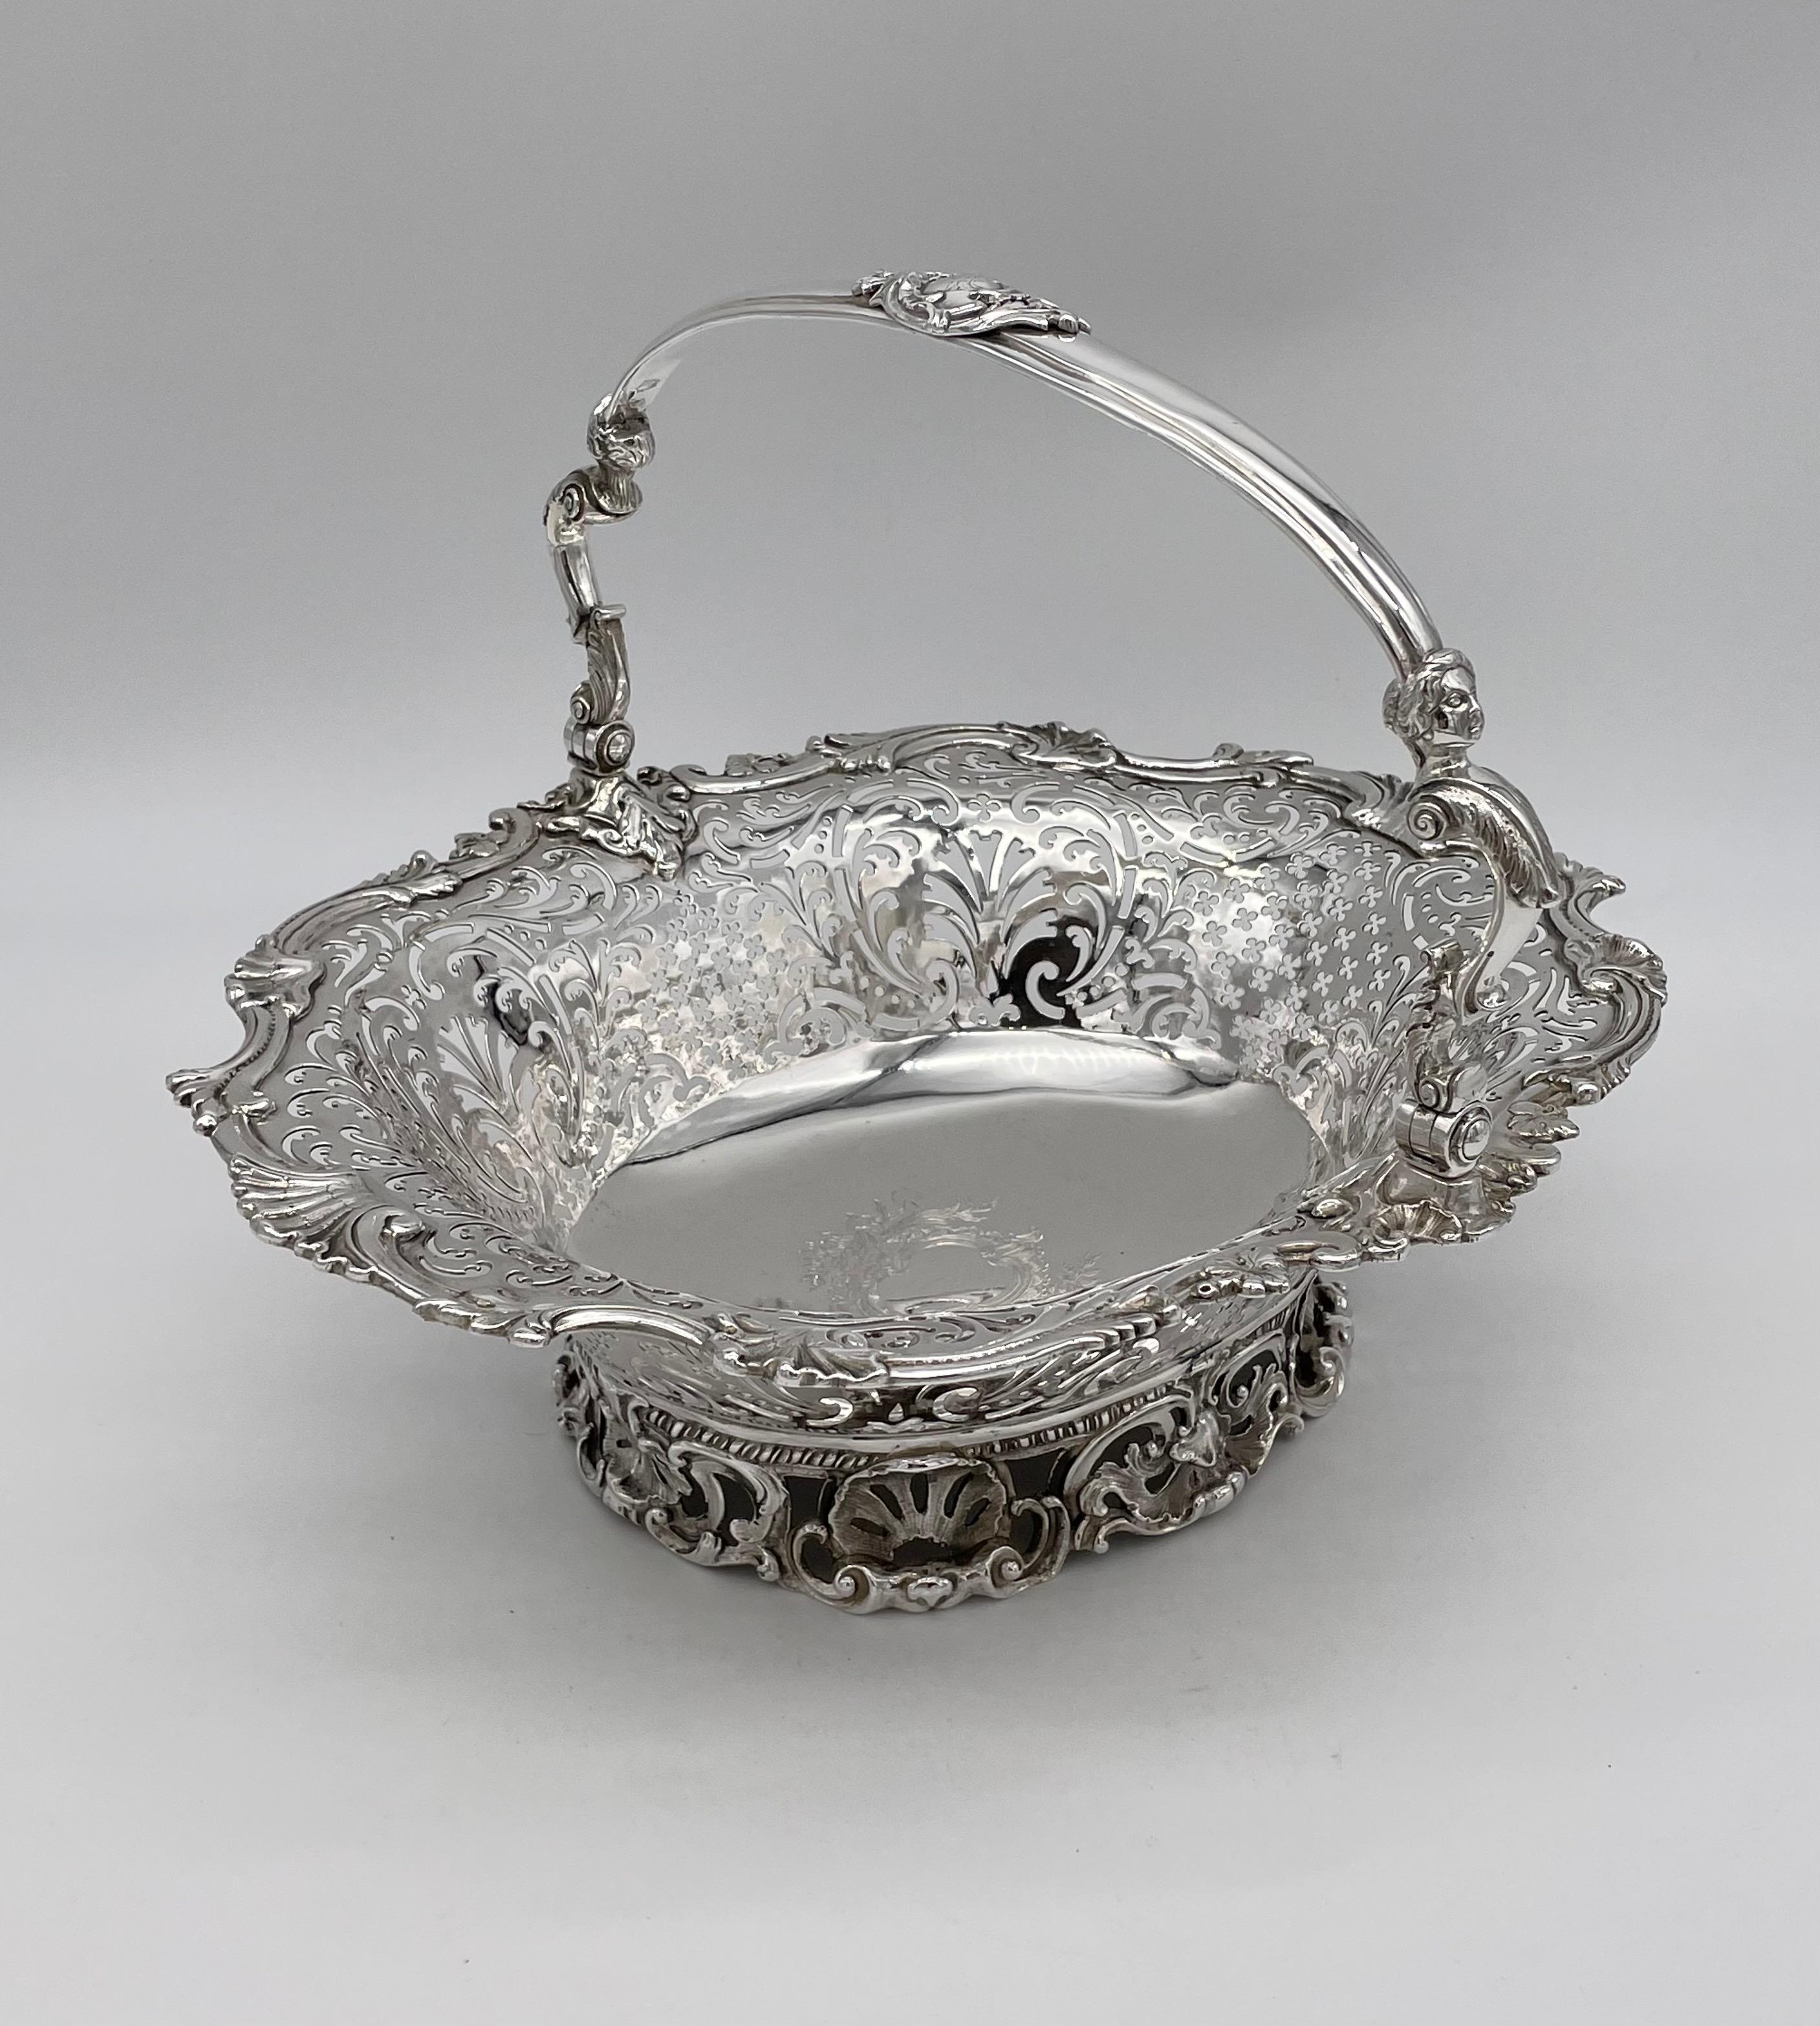 A George II sterling silver bread basket, London 1750 by Samuel Herbert & Co
Of shaped oval form in the Rococo style, all raised upon a cast scallop shell and C scroll foot. The rim formed as splayed shells and acanthus scrolls, the swing handle